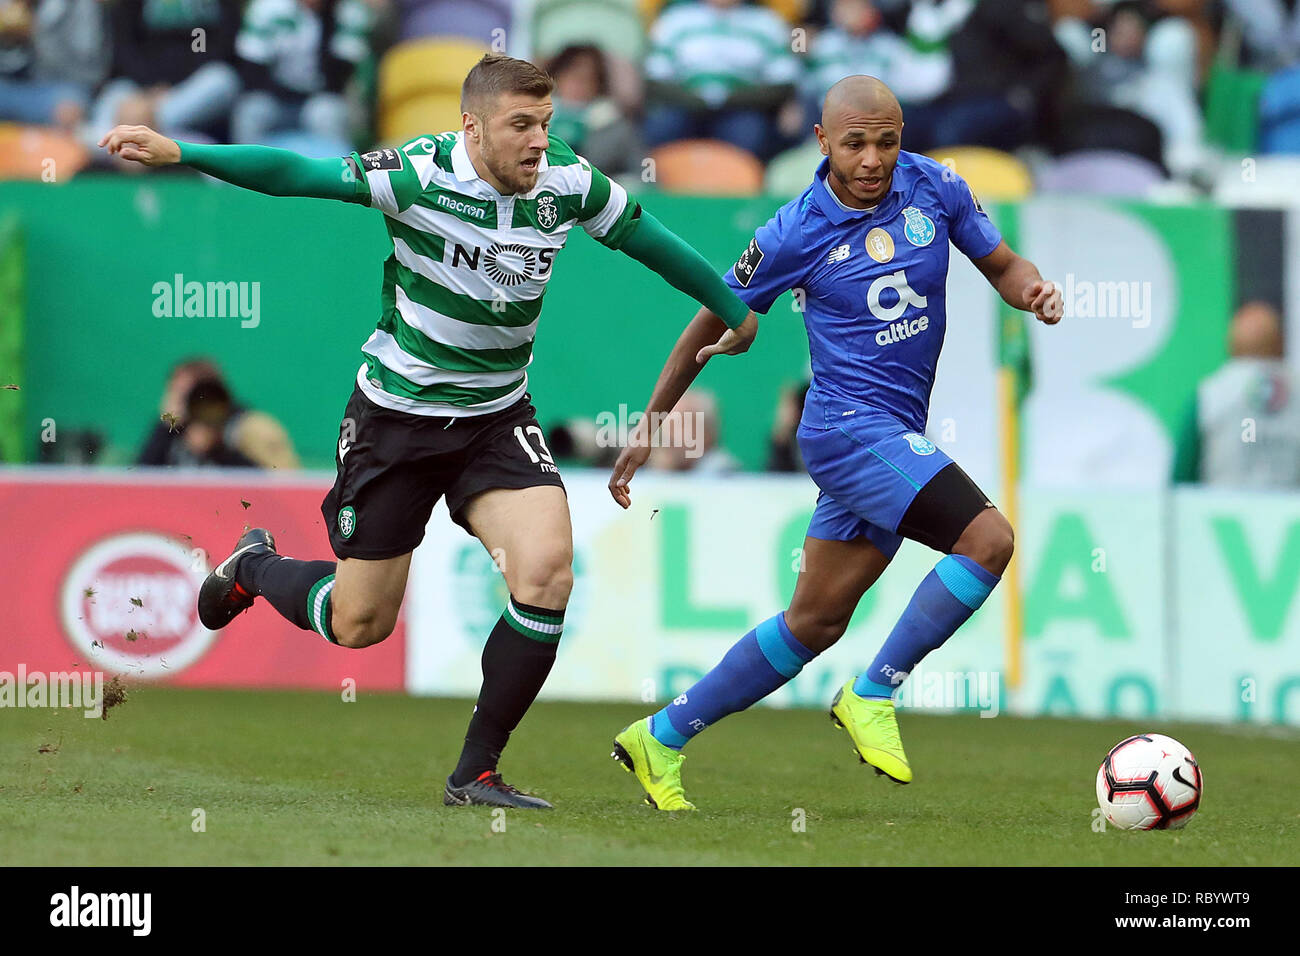 Stefan Ristovski of Sporting CP (L) and Yacine Brahimi of FC Porto (R) are seen in action during the League NOS 2018/19 football match between Sporting CP vs FC Porto. (Final score: Sporting CP 0 - 0 FC Porto) Stock Photo